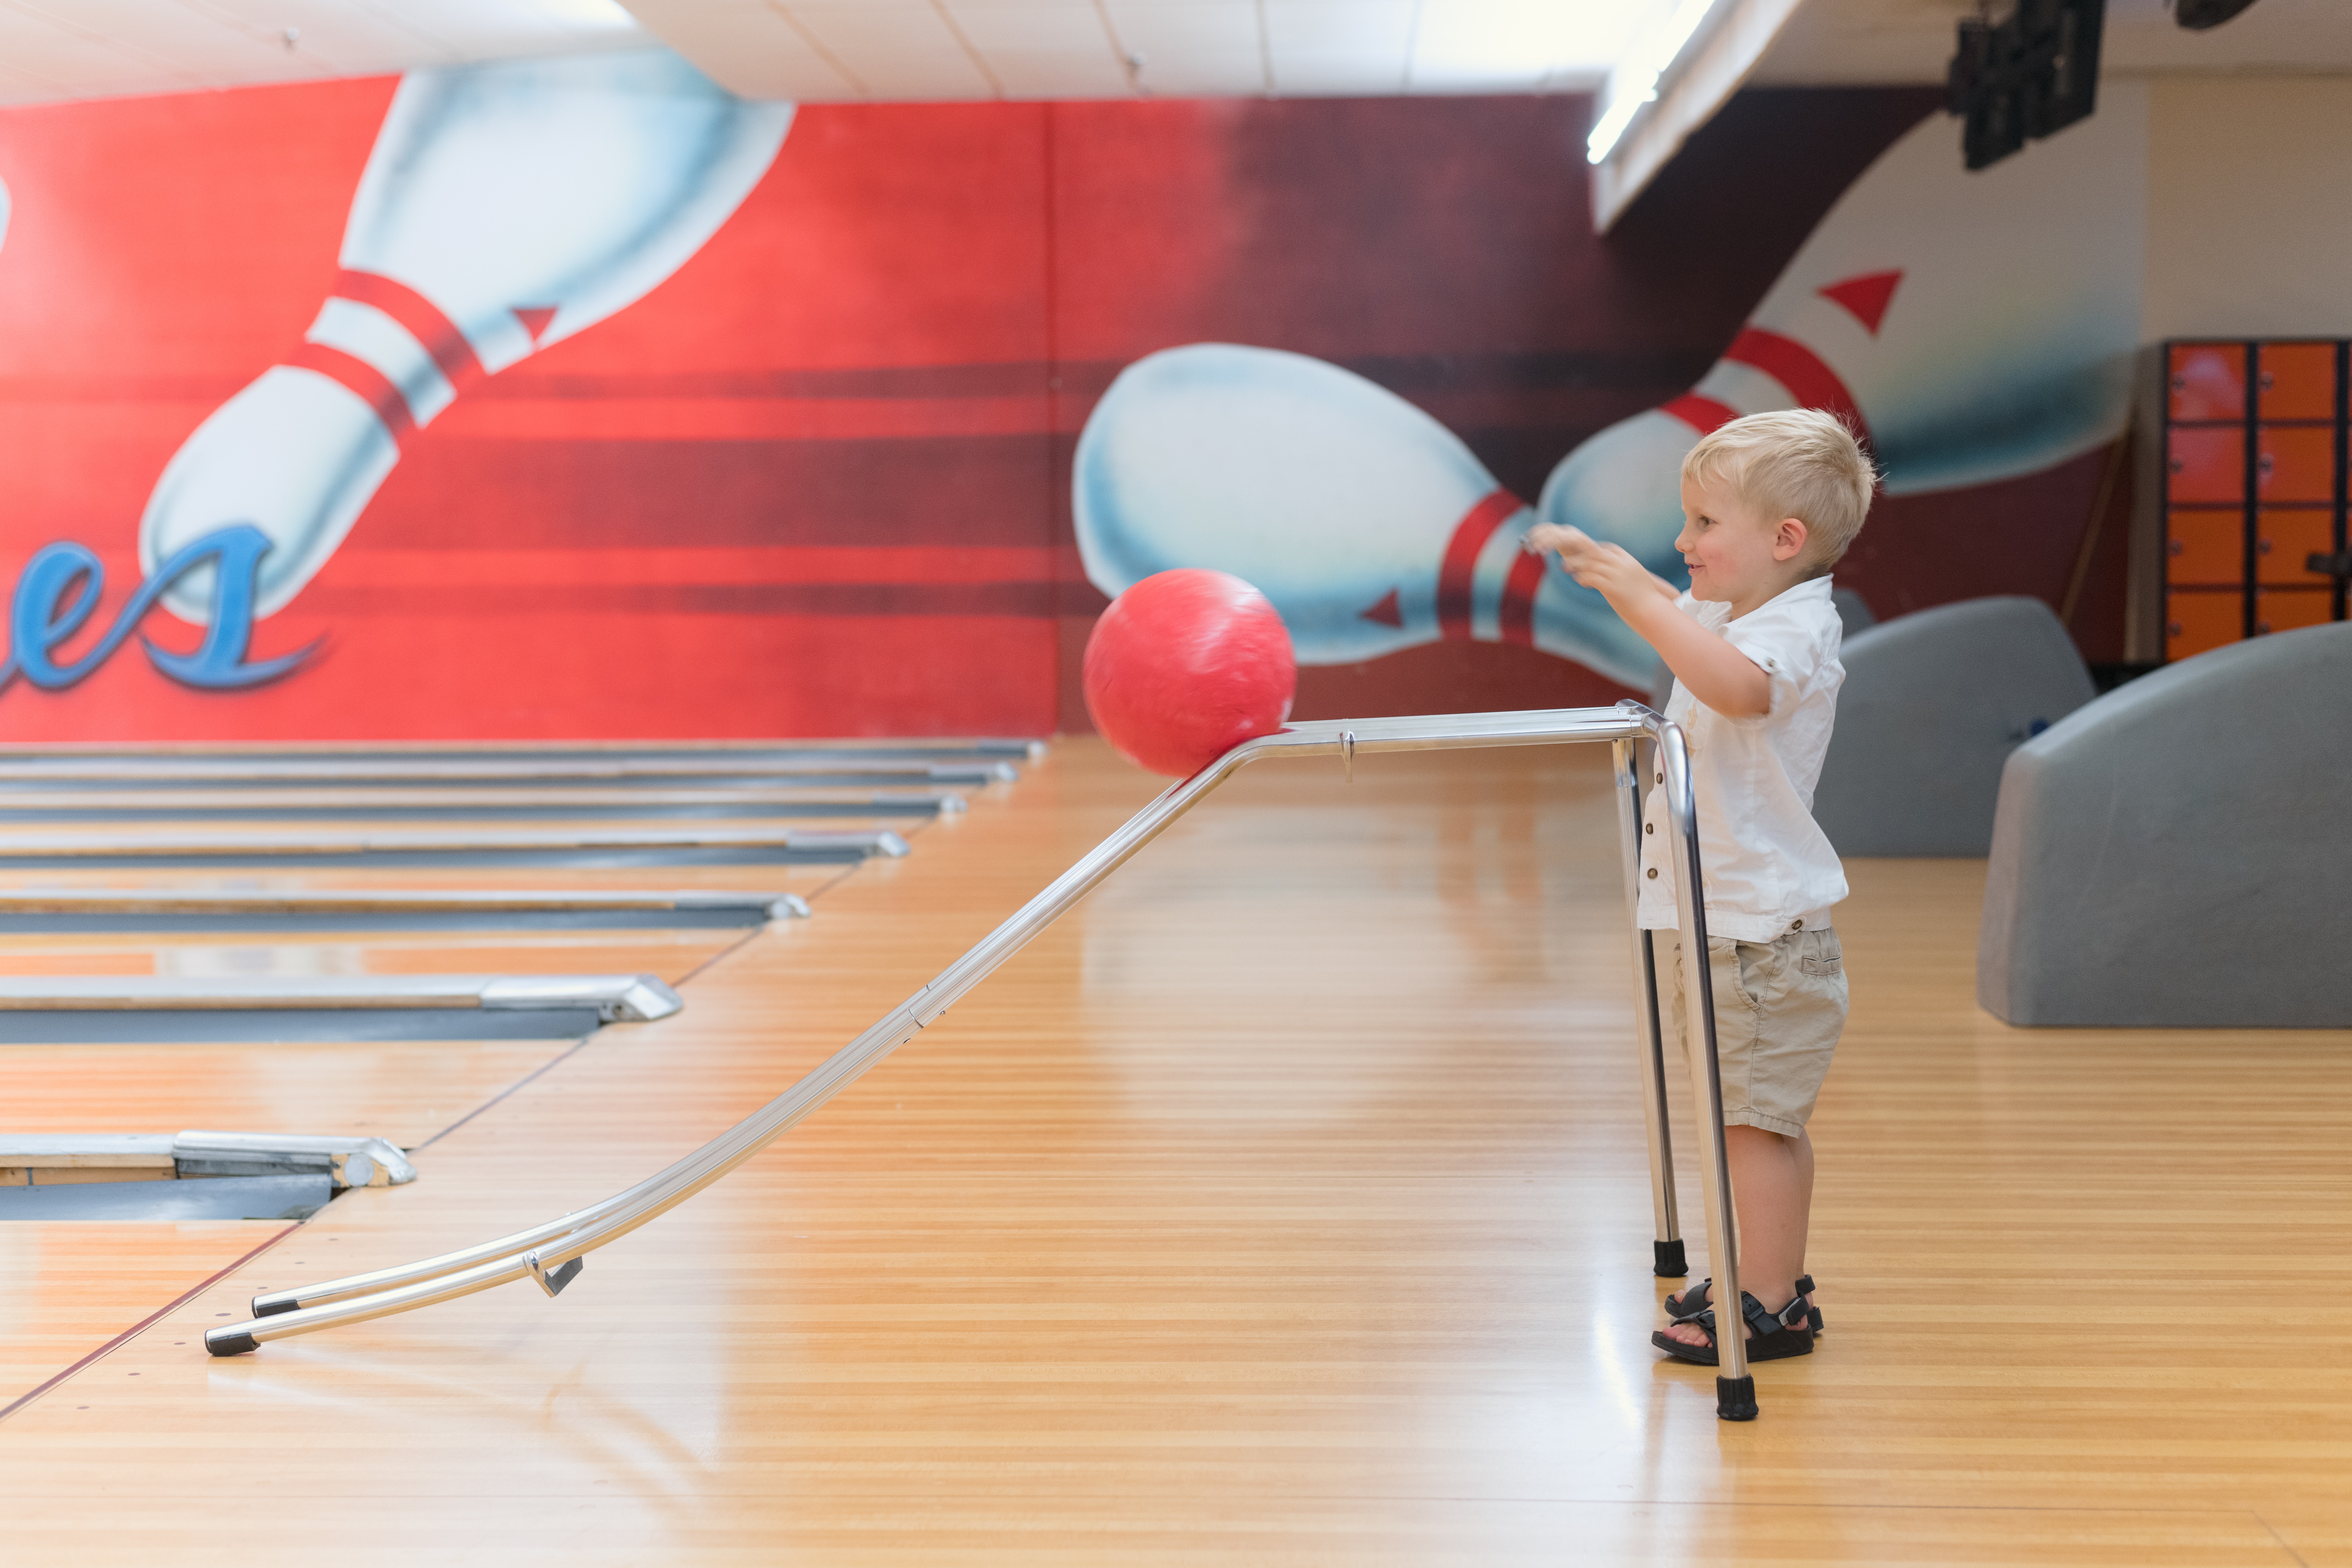 a young boy standing in a bowling alley.